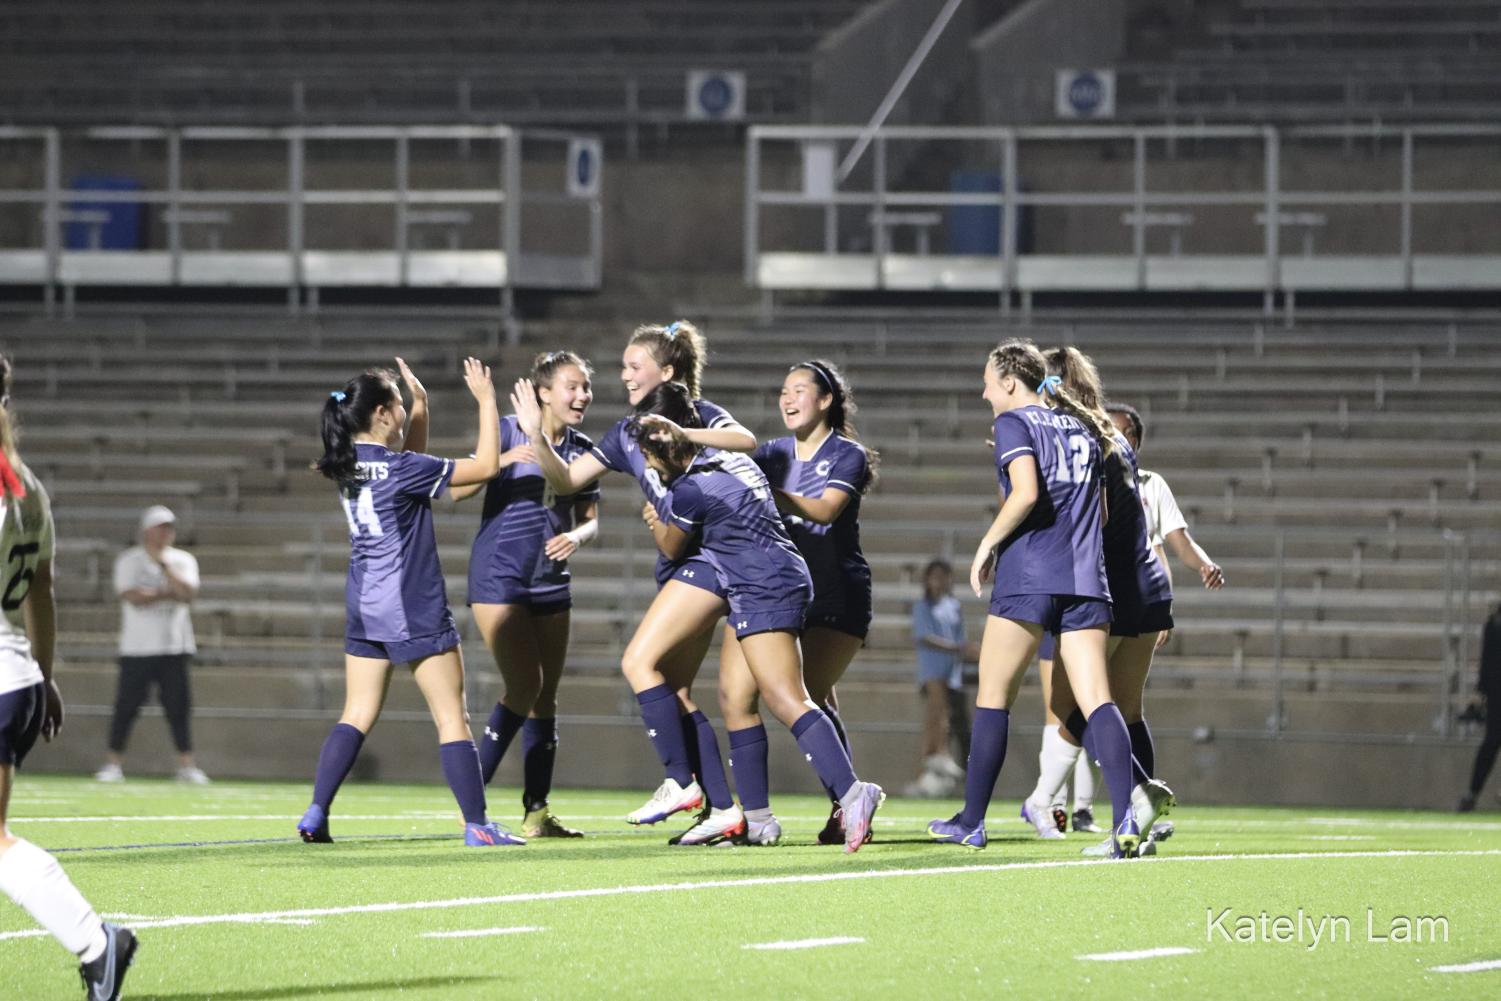 Ridge Point Soccer Teams Gear Up for New Season with High Hopes